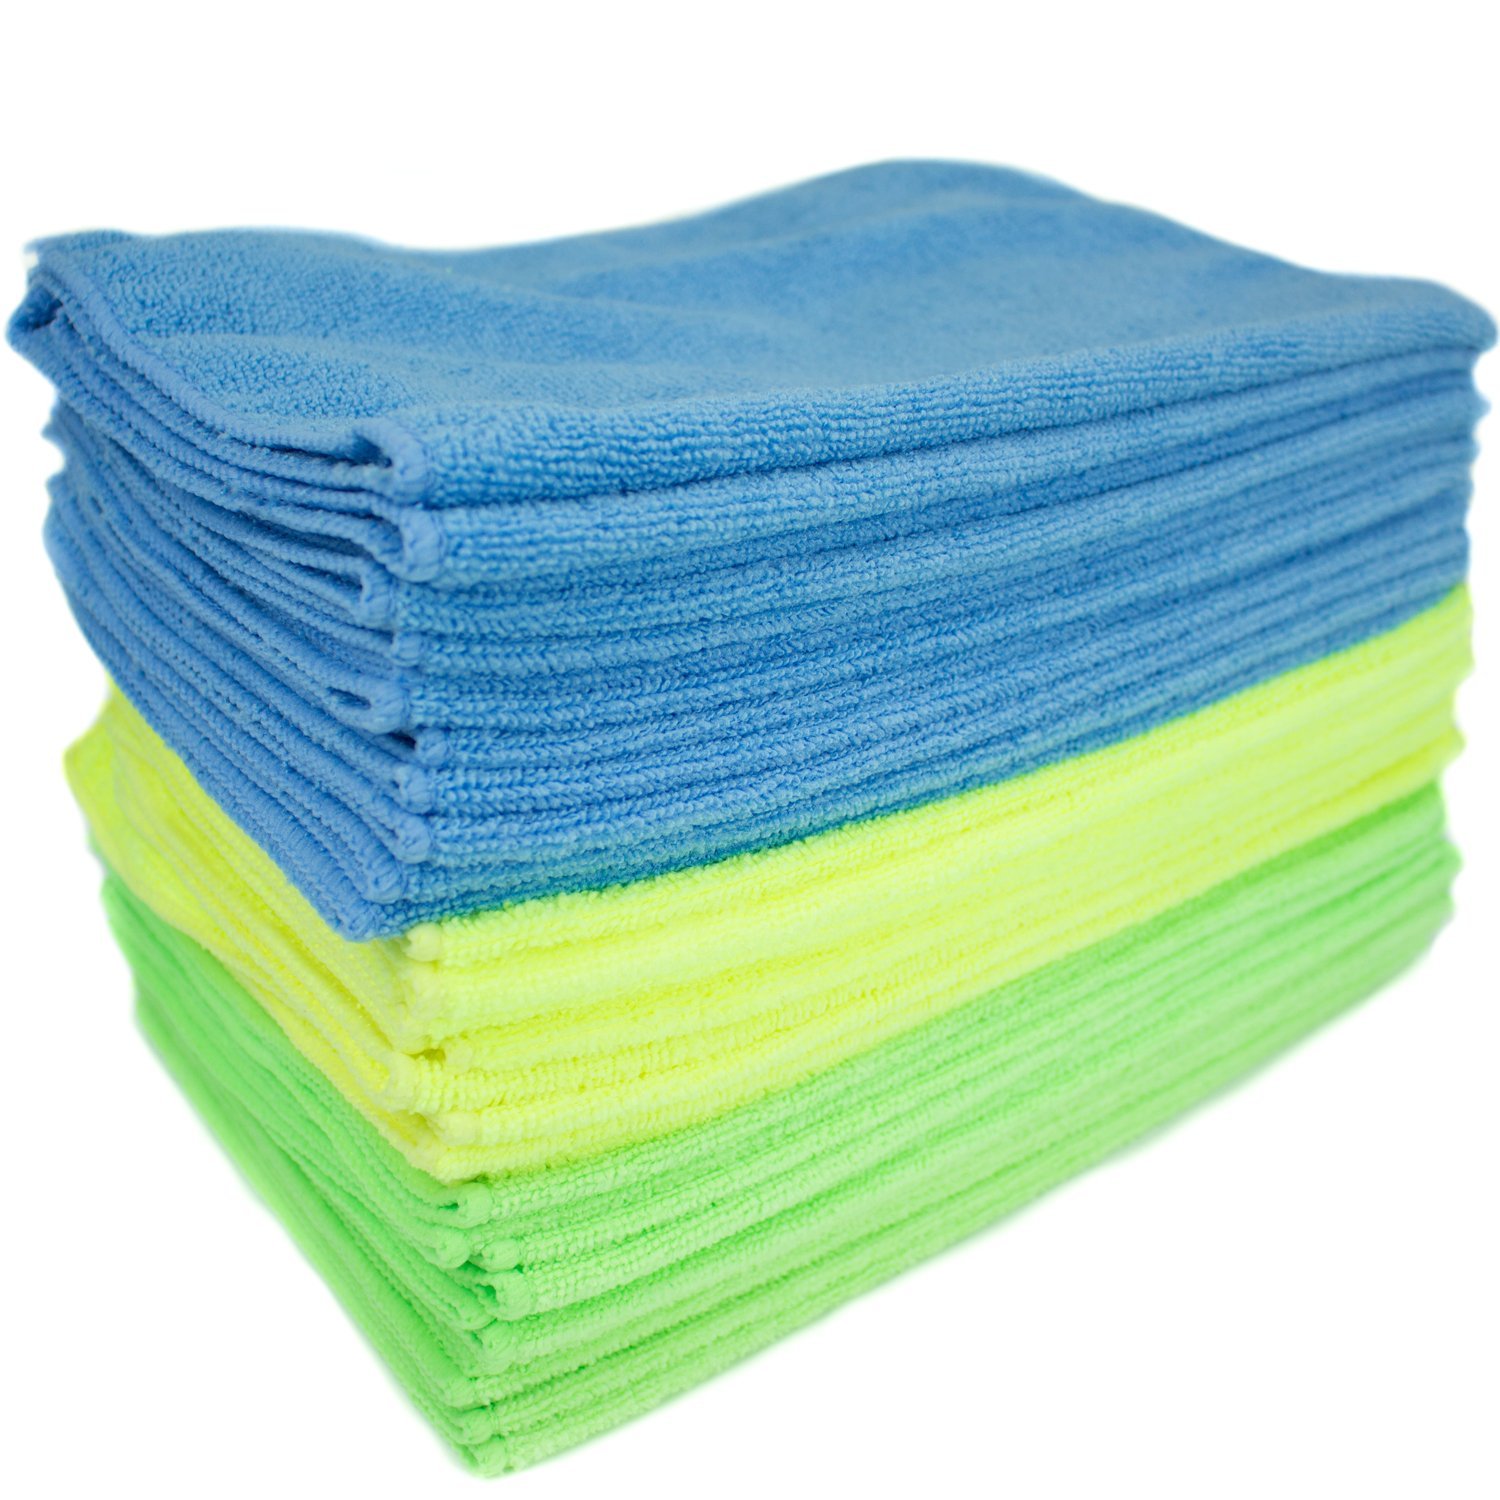 Zwipes Microfiber Cleaning Cloths 24-Pack – Just $9.77!